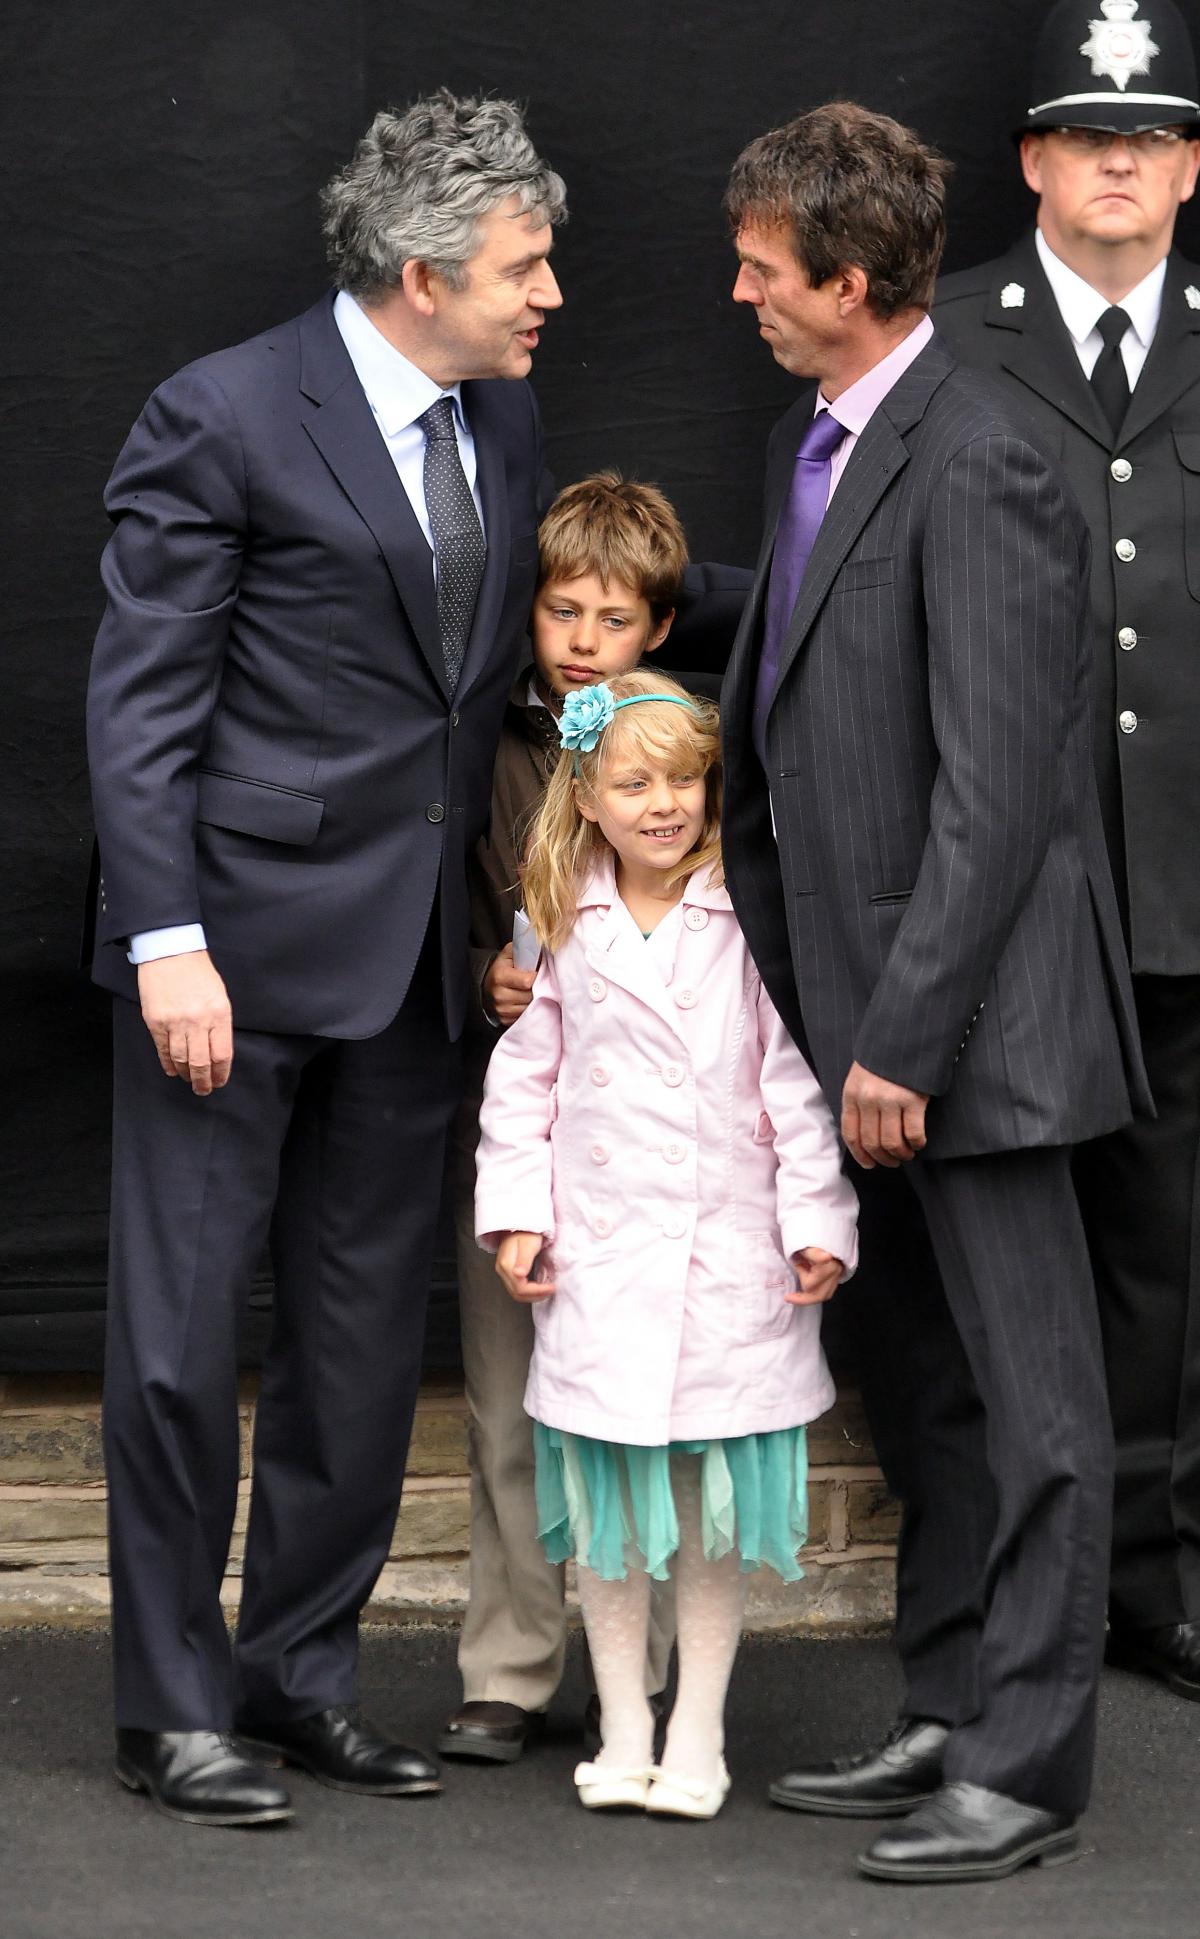 Prime Minister Gordon Brown with Paul Beshenivsky and his children Lydia and Paul.